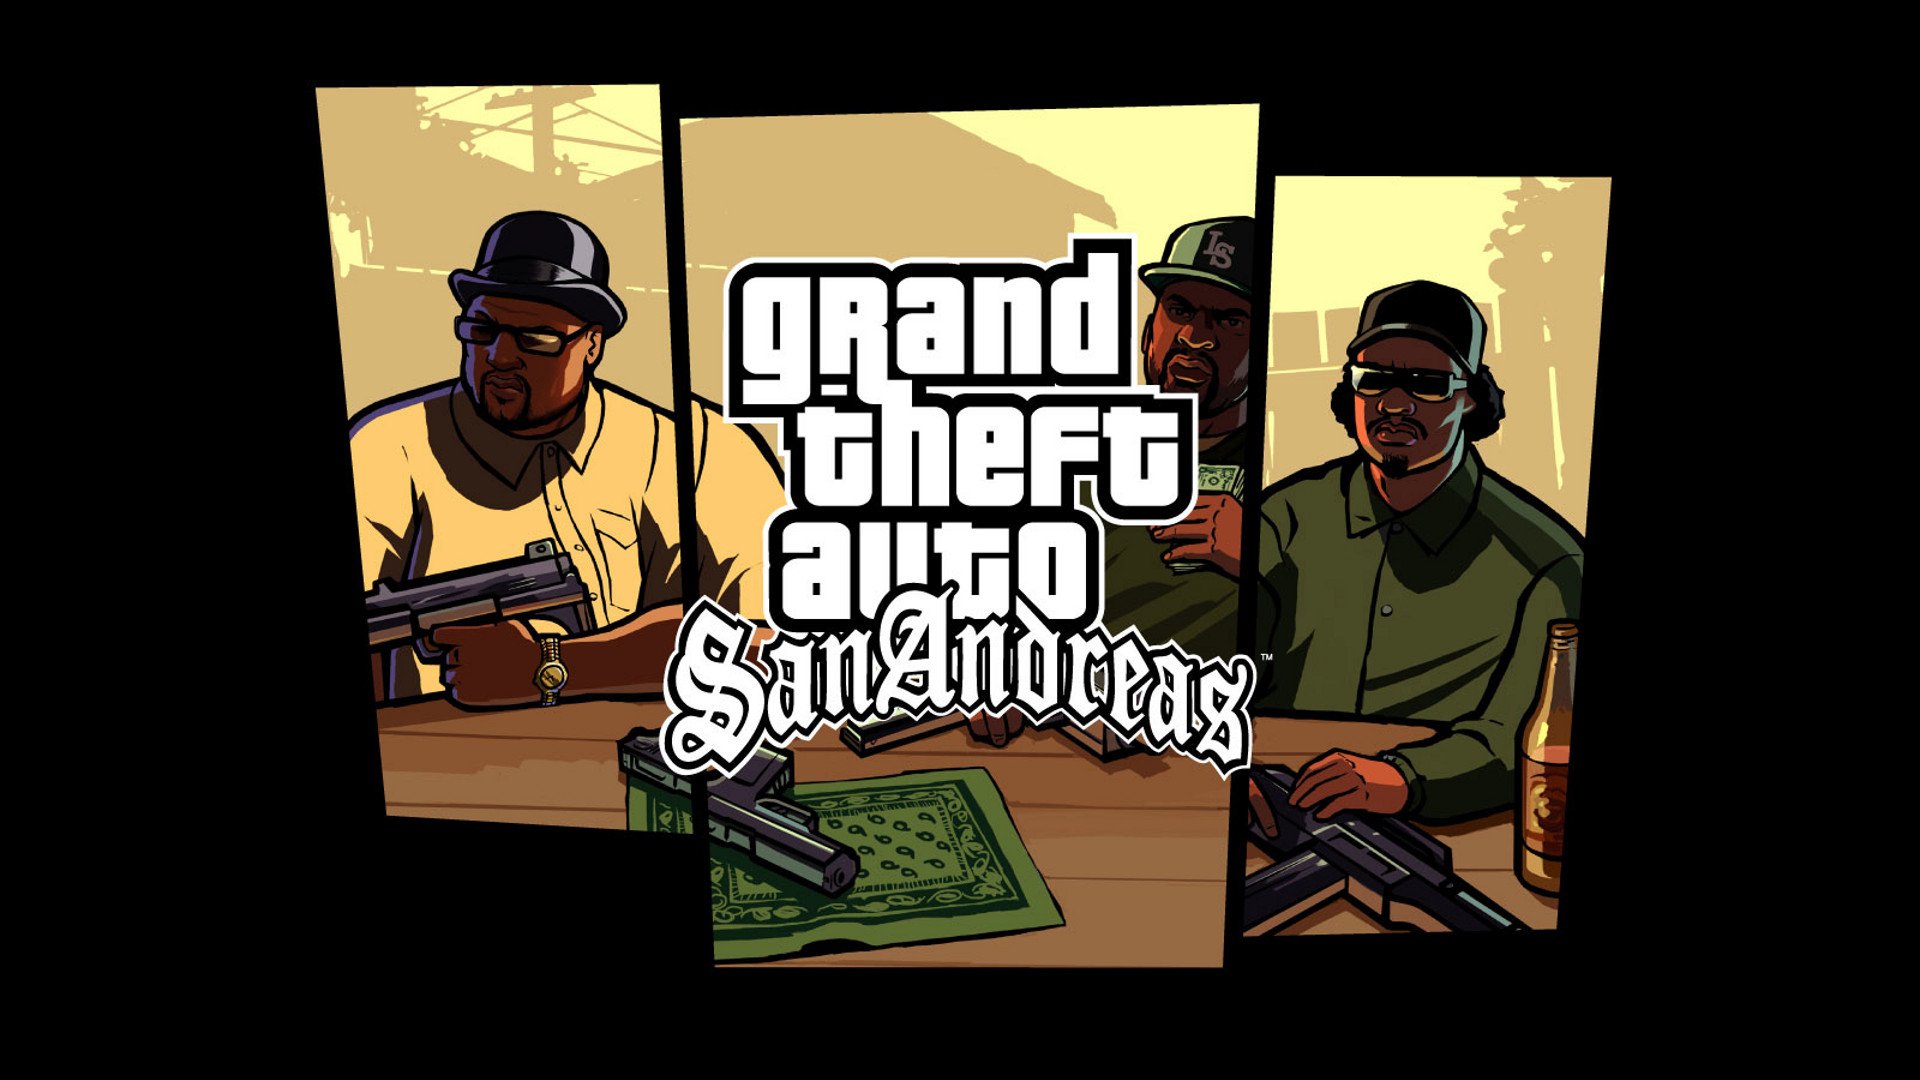 Grand Theft Auto San Andreas HD Wallpaper Background Image